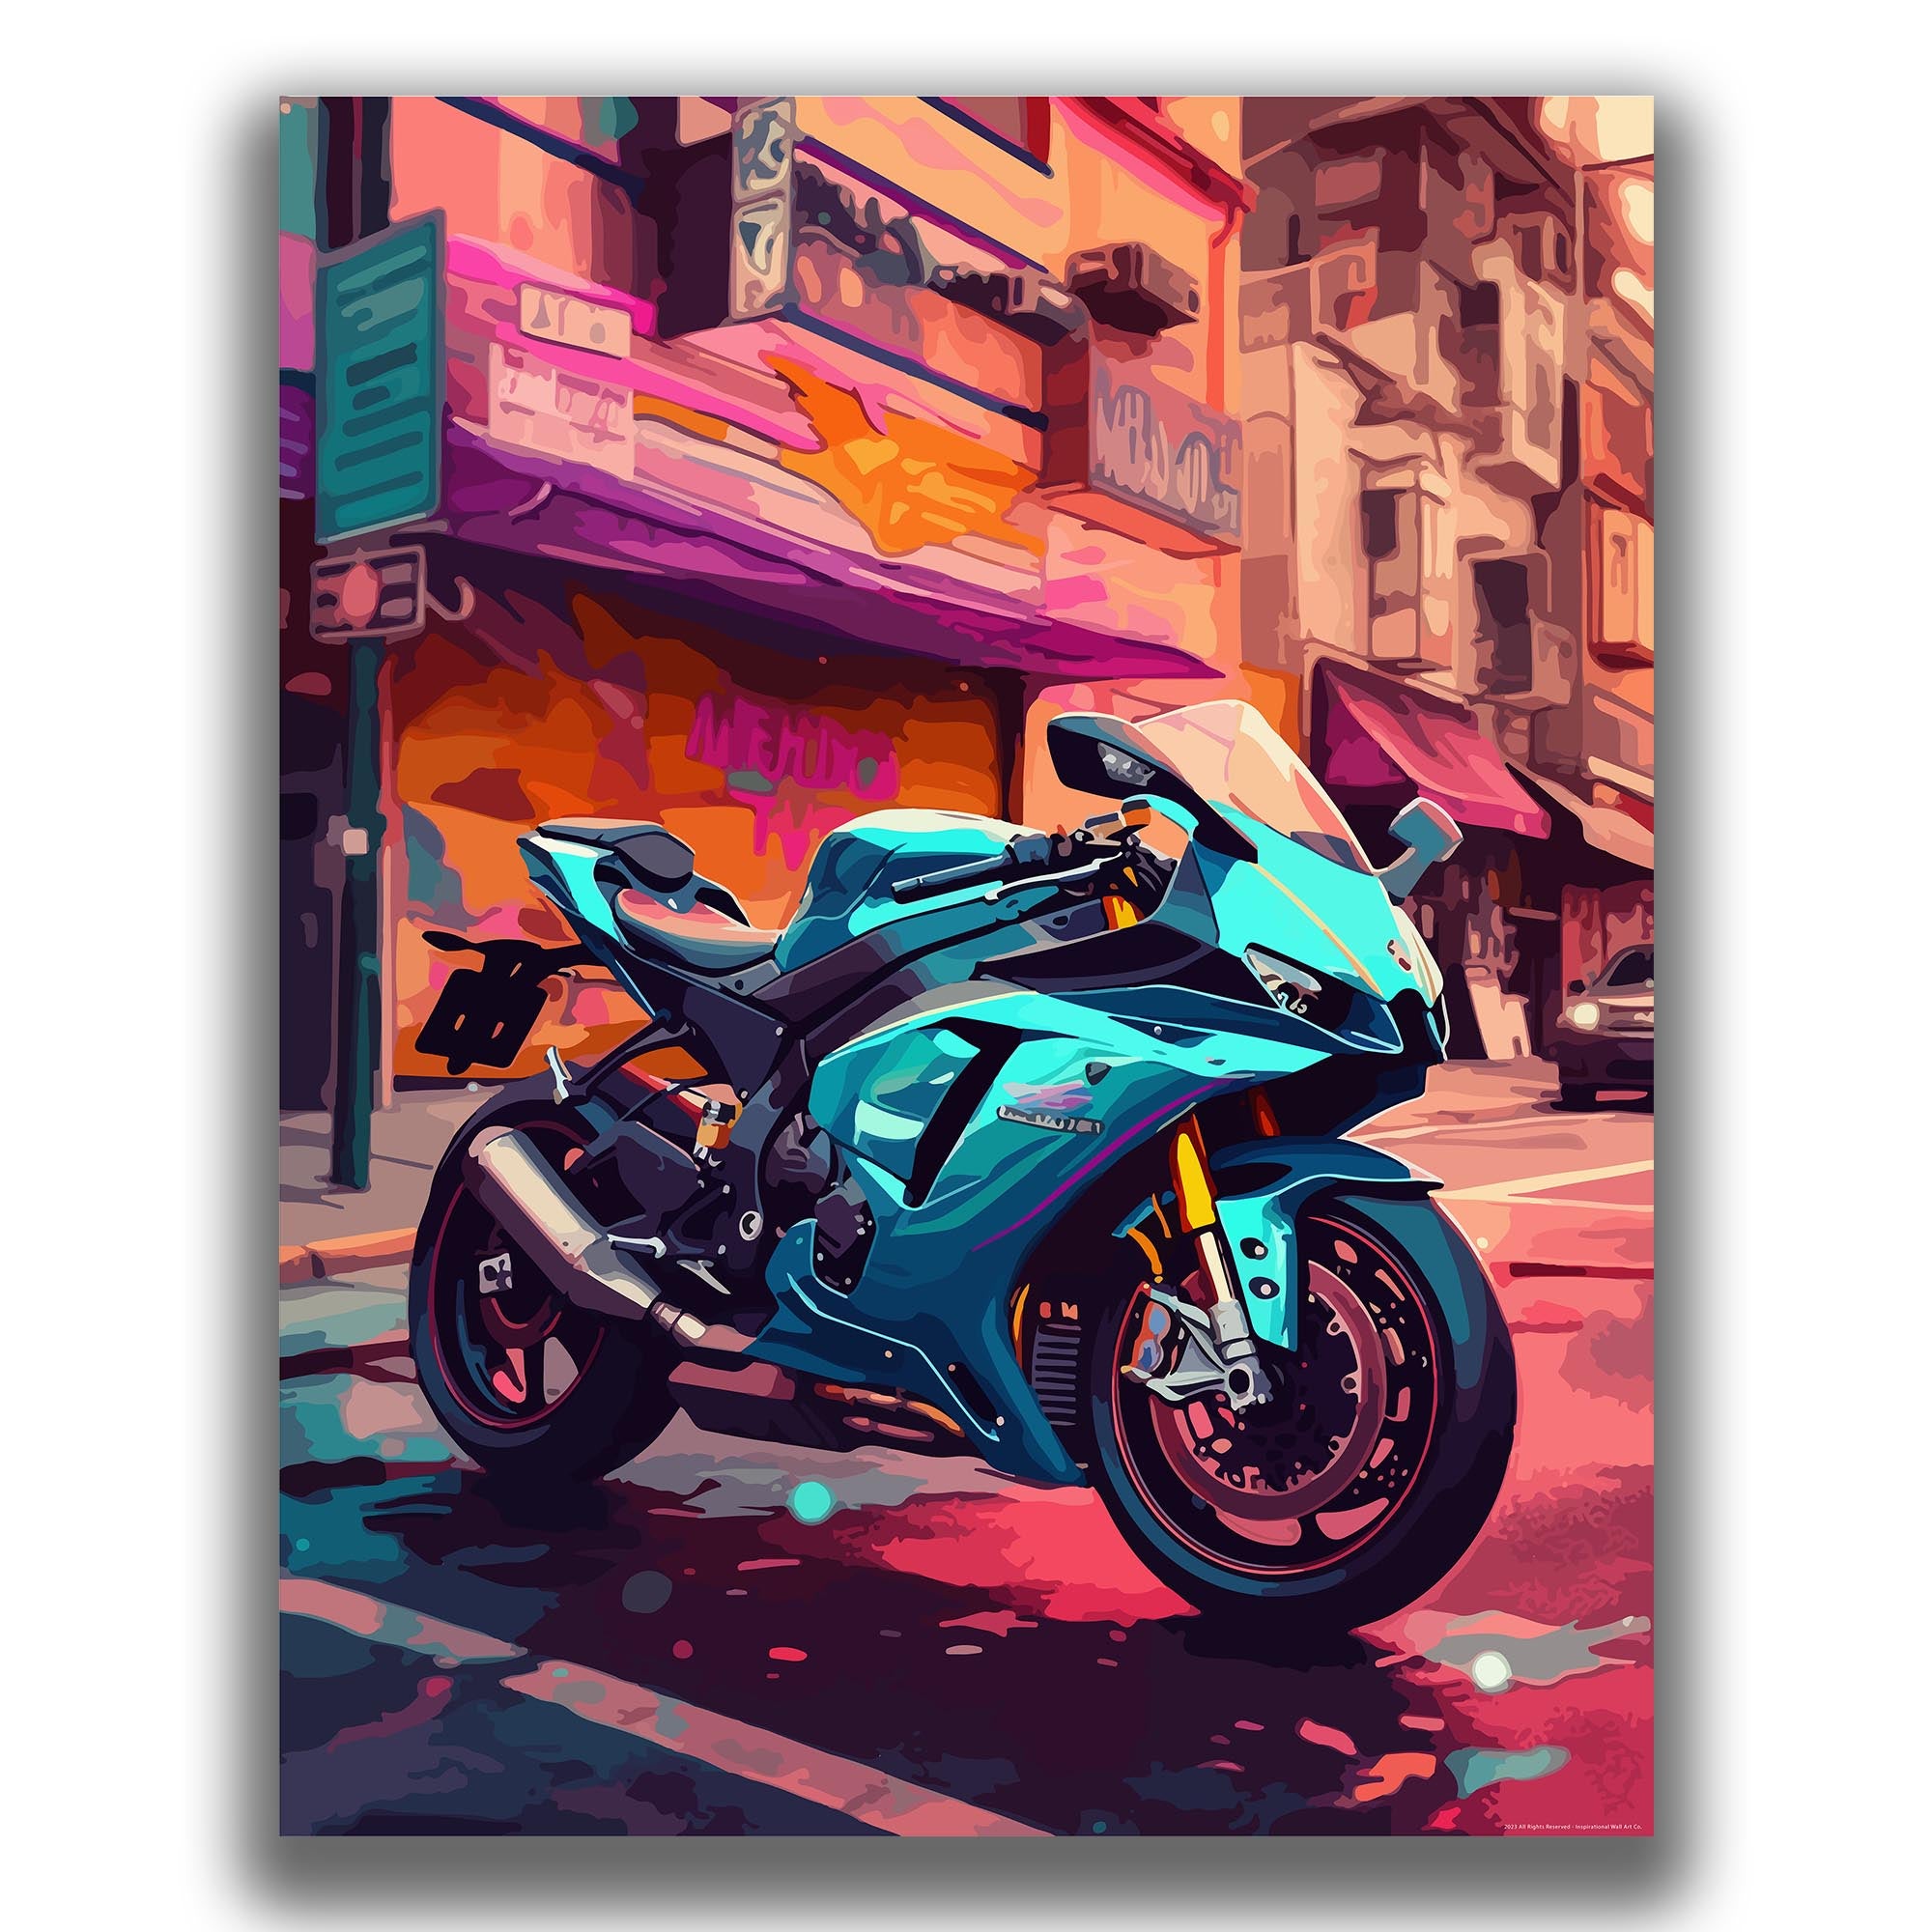 Graceful - Motorcycle Poster